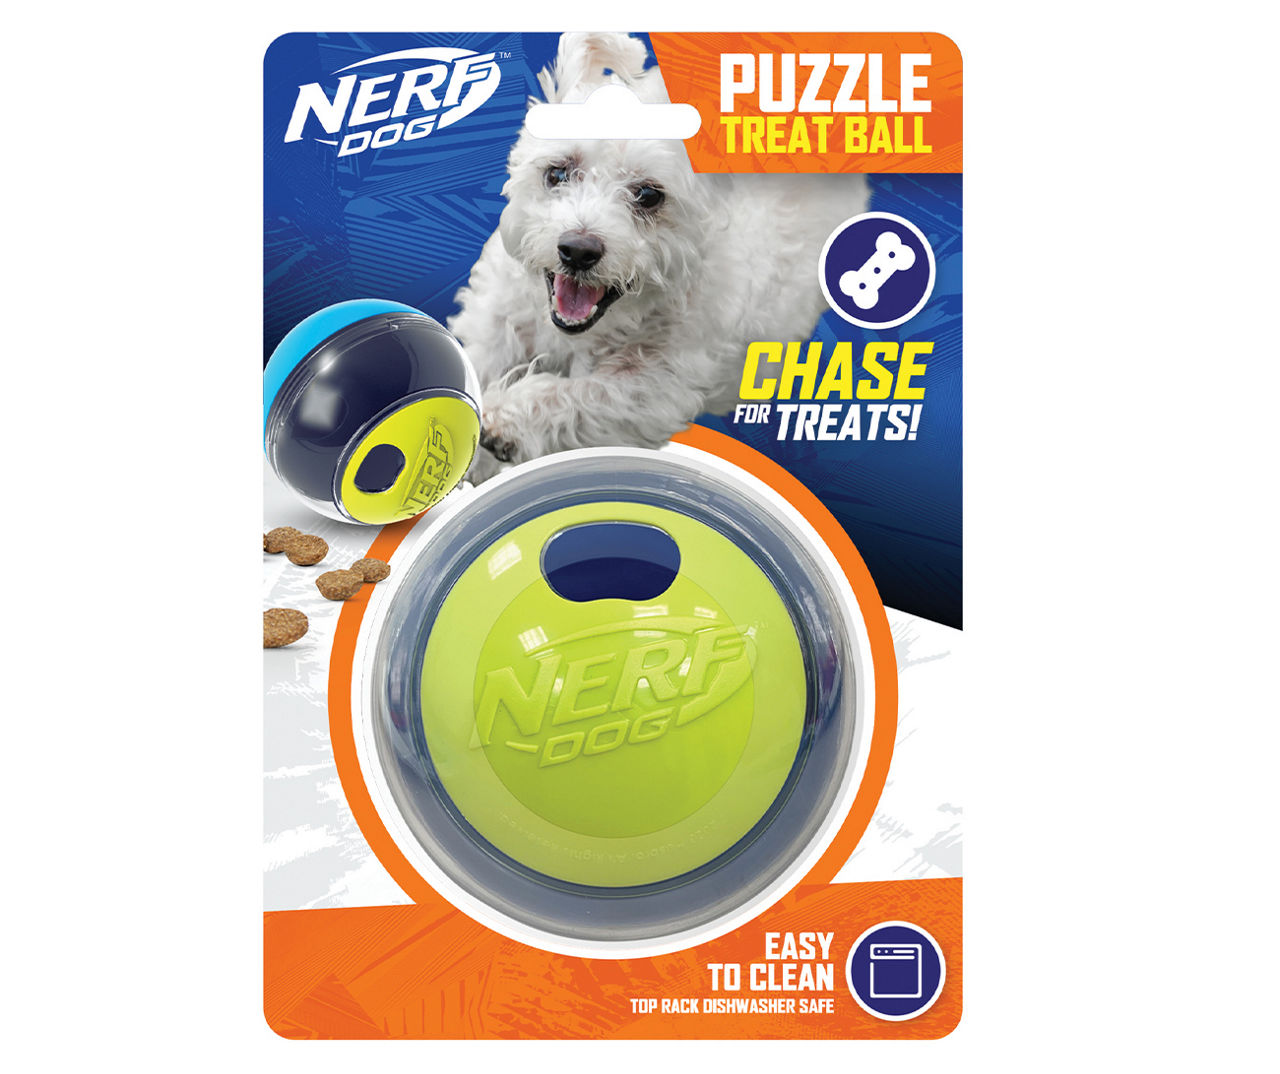 L'chic Snack Ball Puzzle Pet Toy, Educational Puzzle and Feeder - 20486661